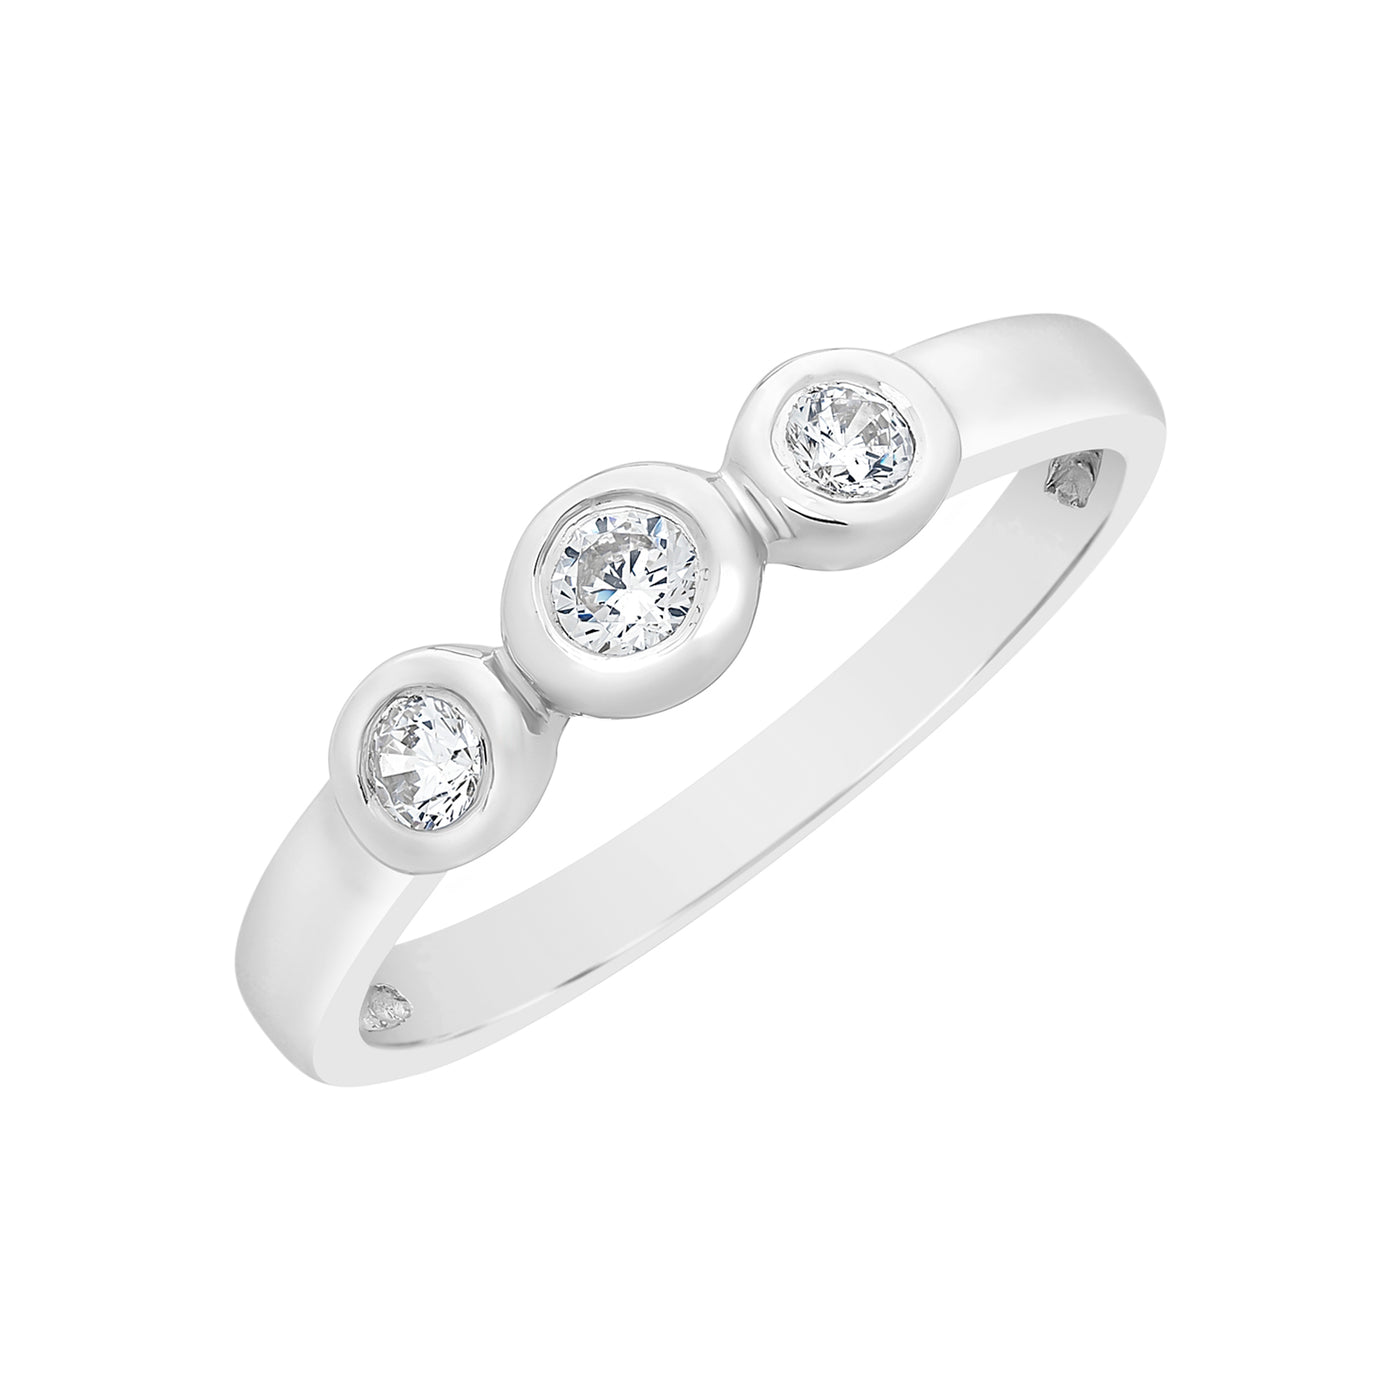 Sterling Silver Trilogy Cubic Zirconia Dress Ring.